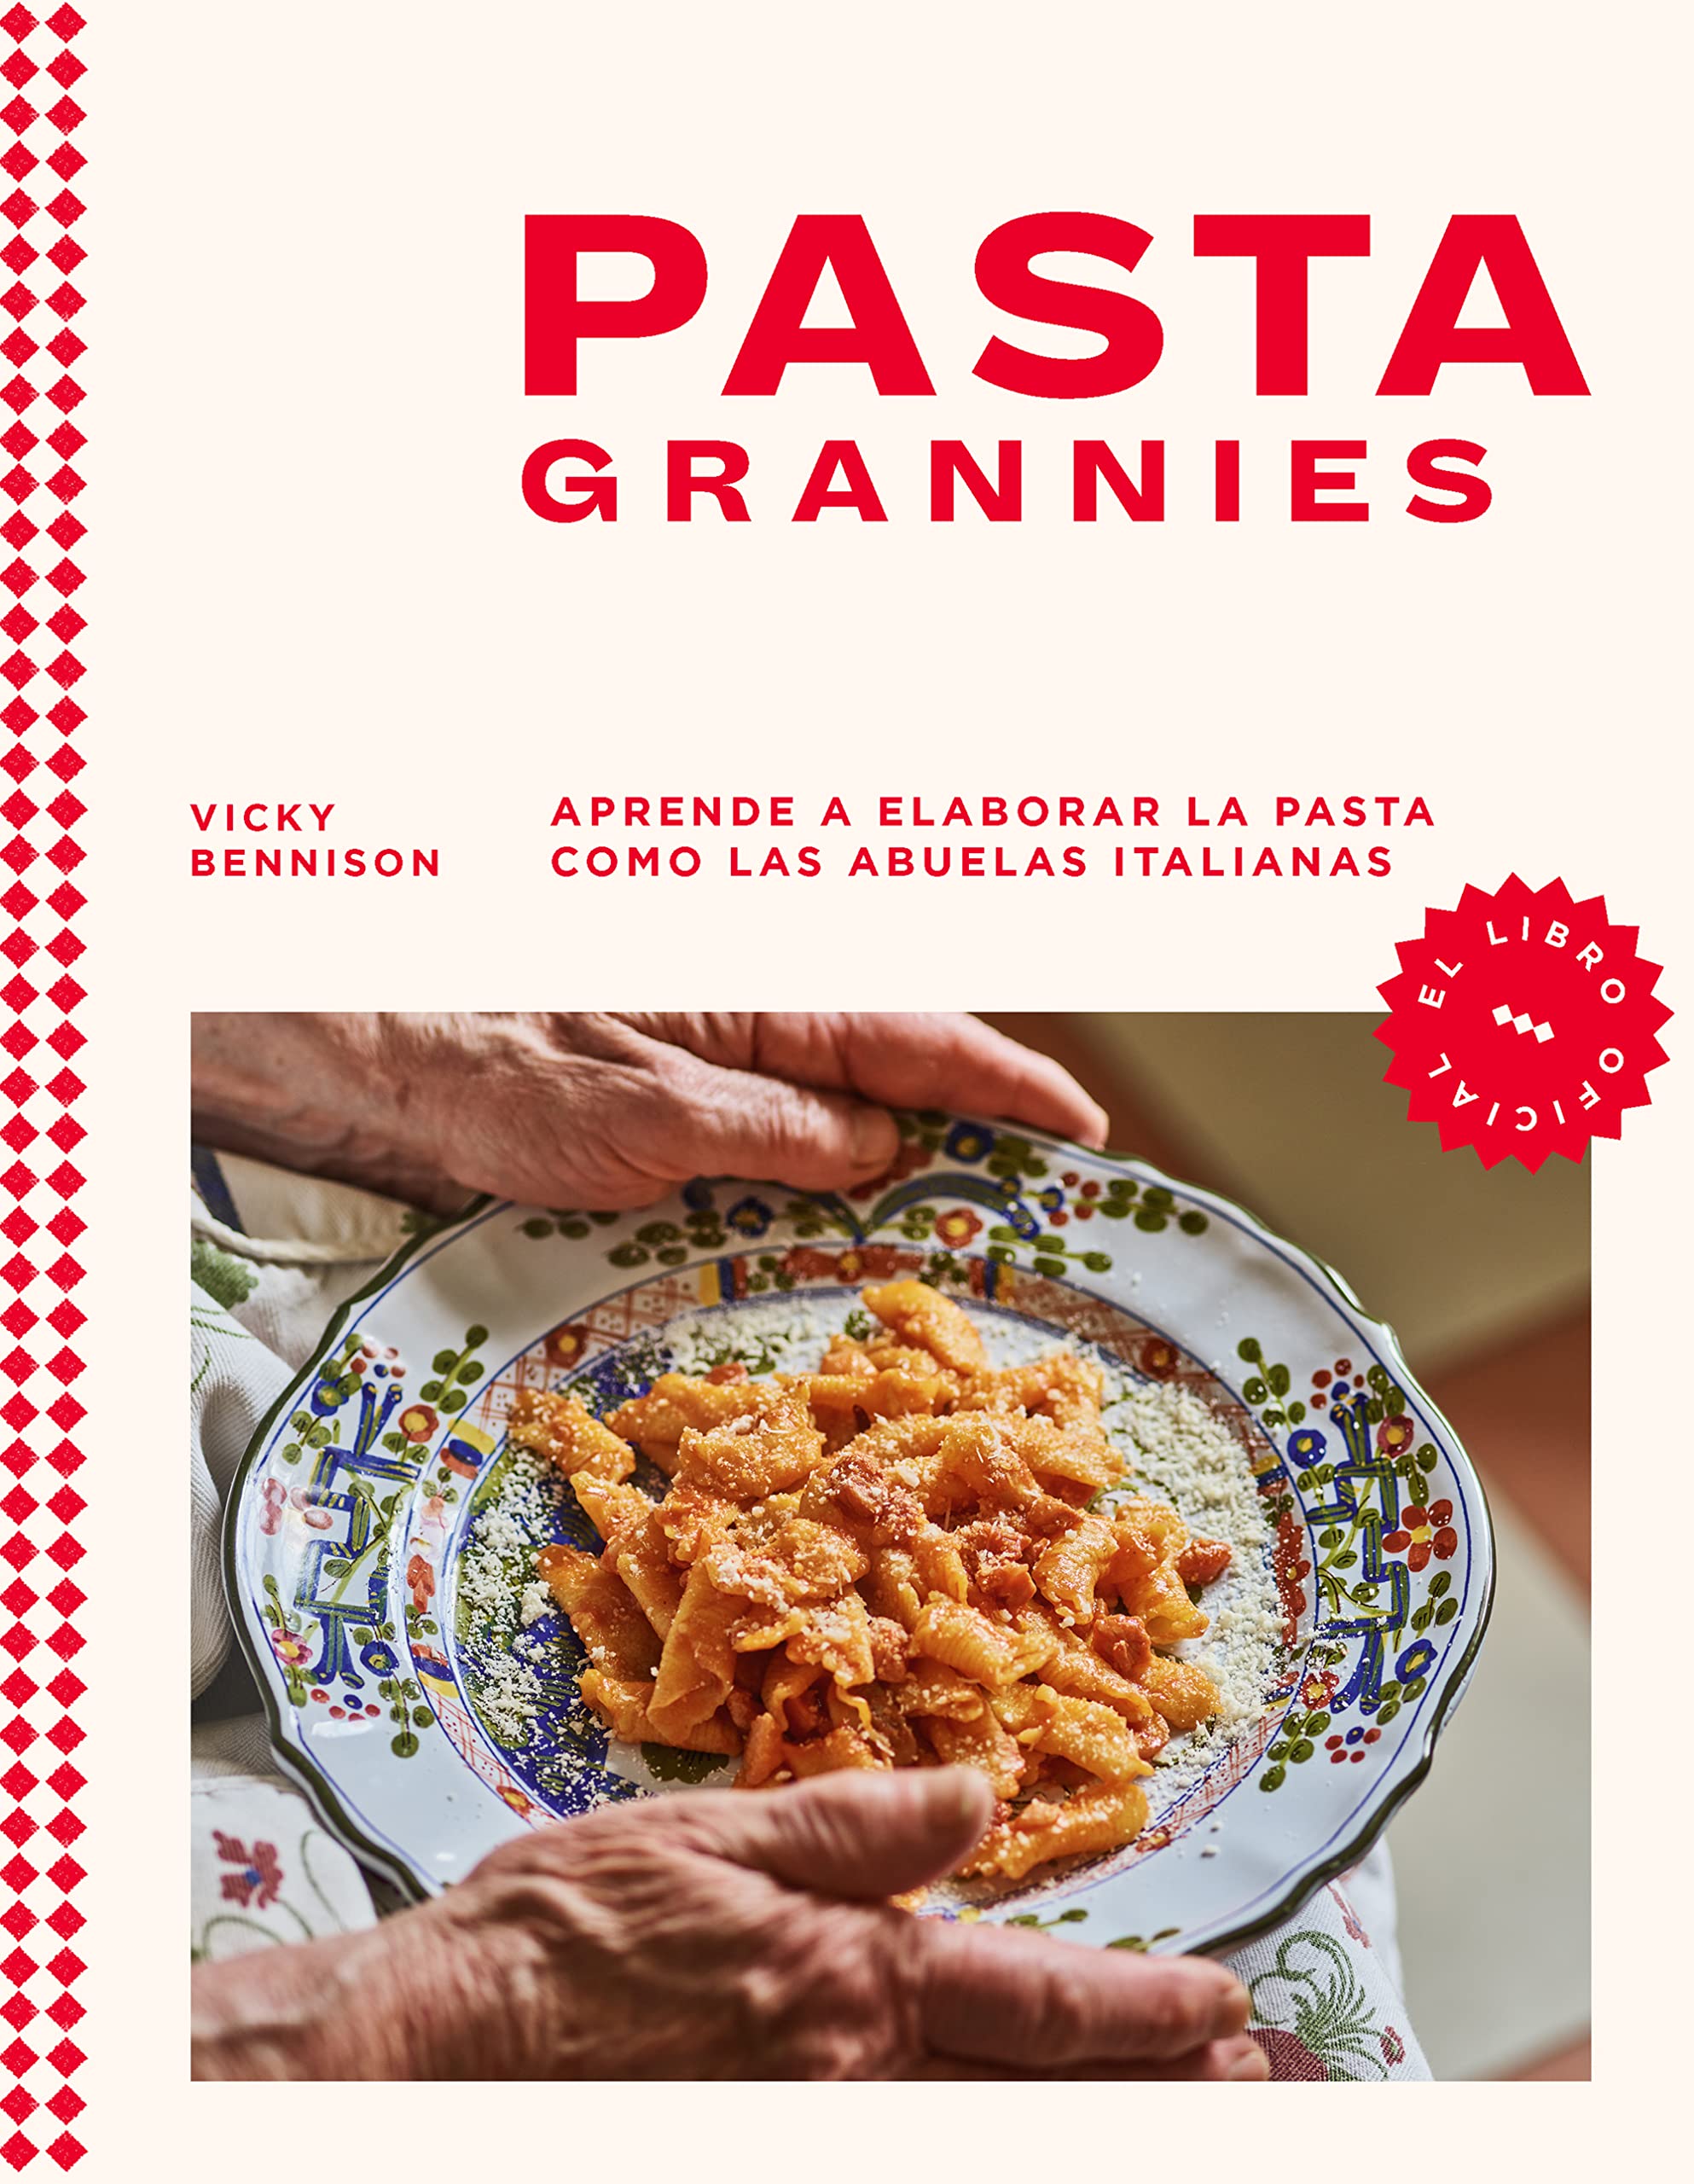 Pasta Grannies / Pasta Grannies: the Official Cookbook. The Secrets of Italy's Best Home Cooks (Spanish Edition)